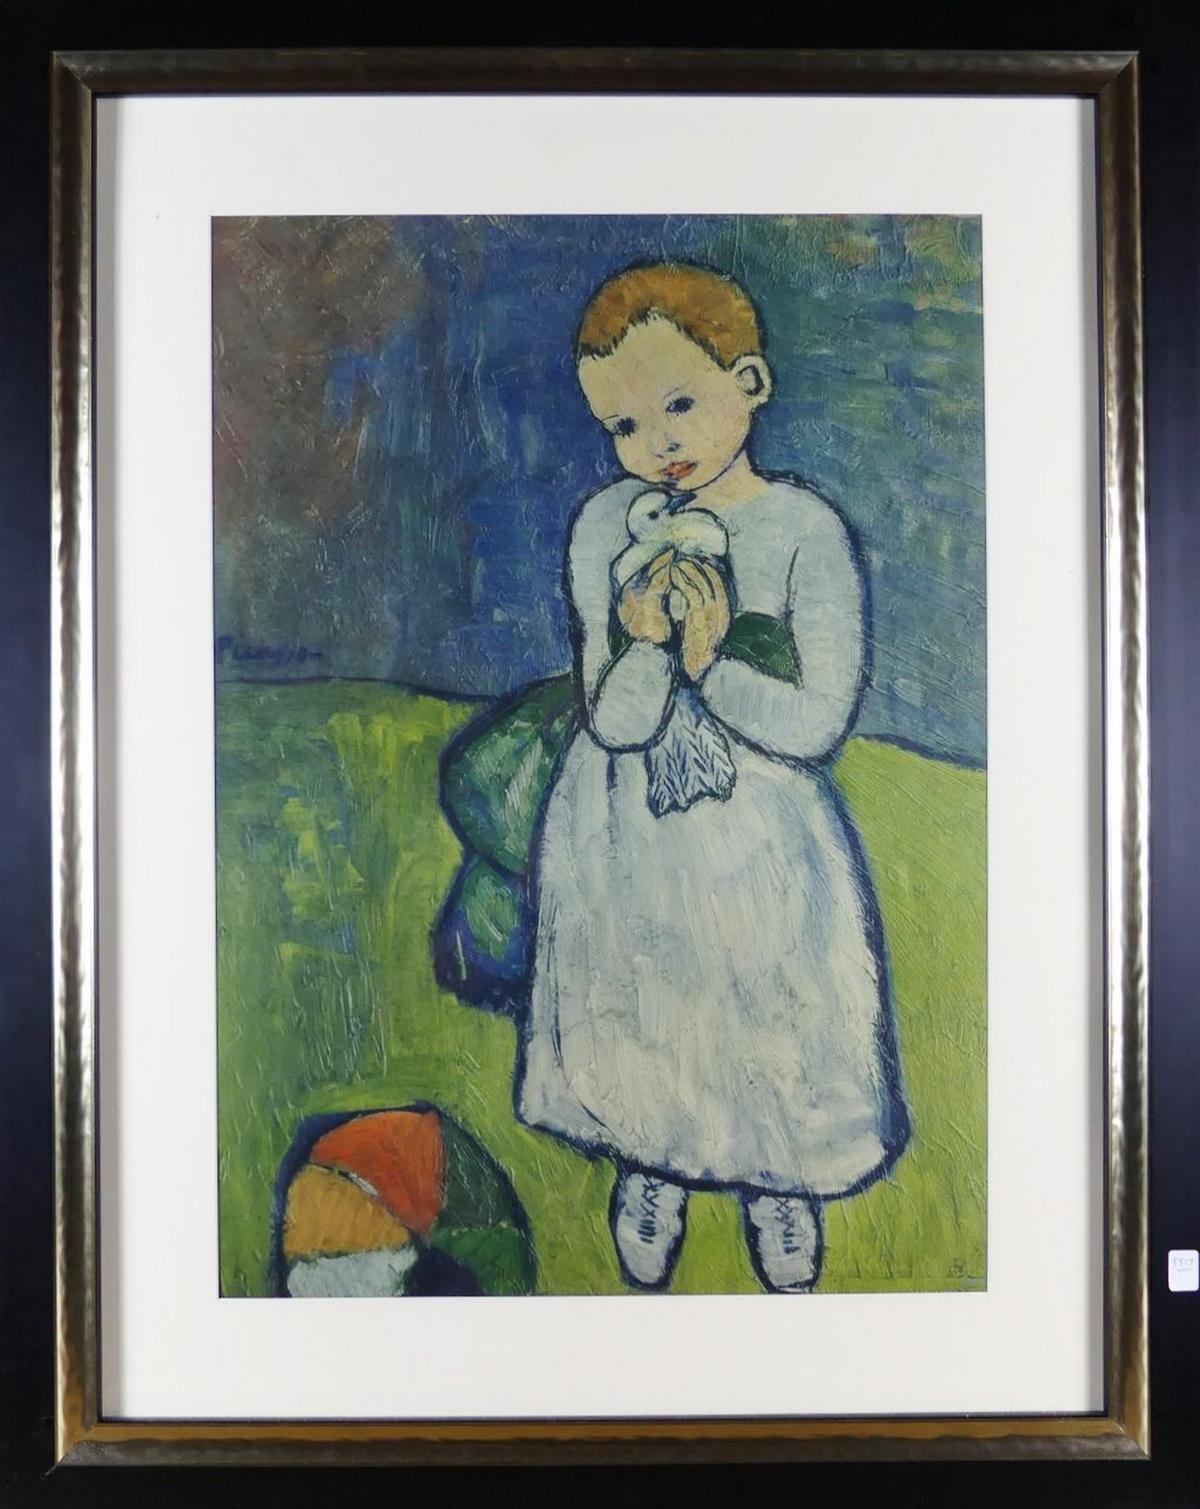 Artwork by Pablo Picasso, Child with a Dove, Made of vintage reproduction print in colours